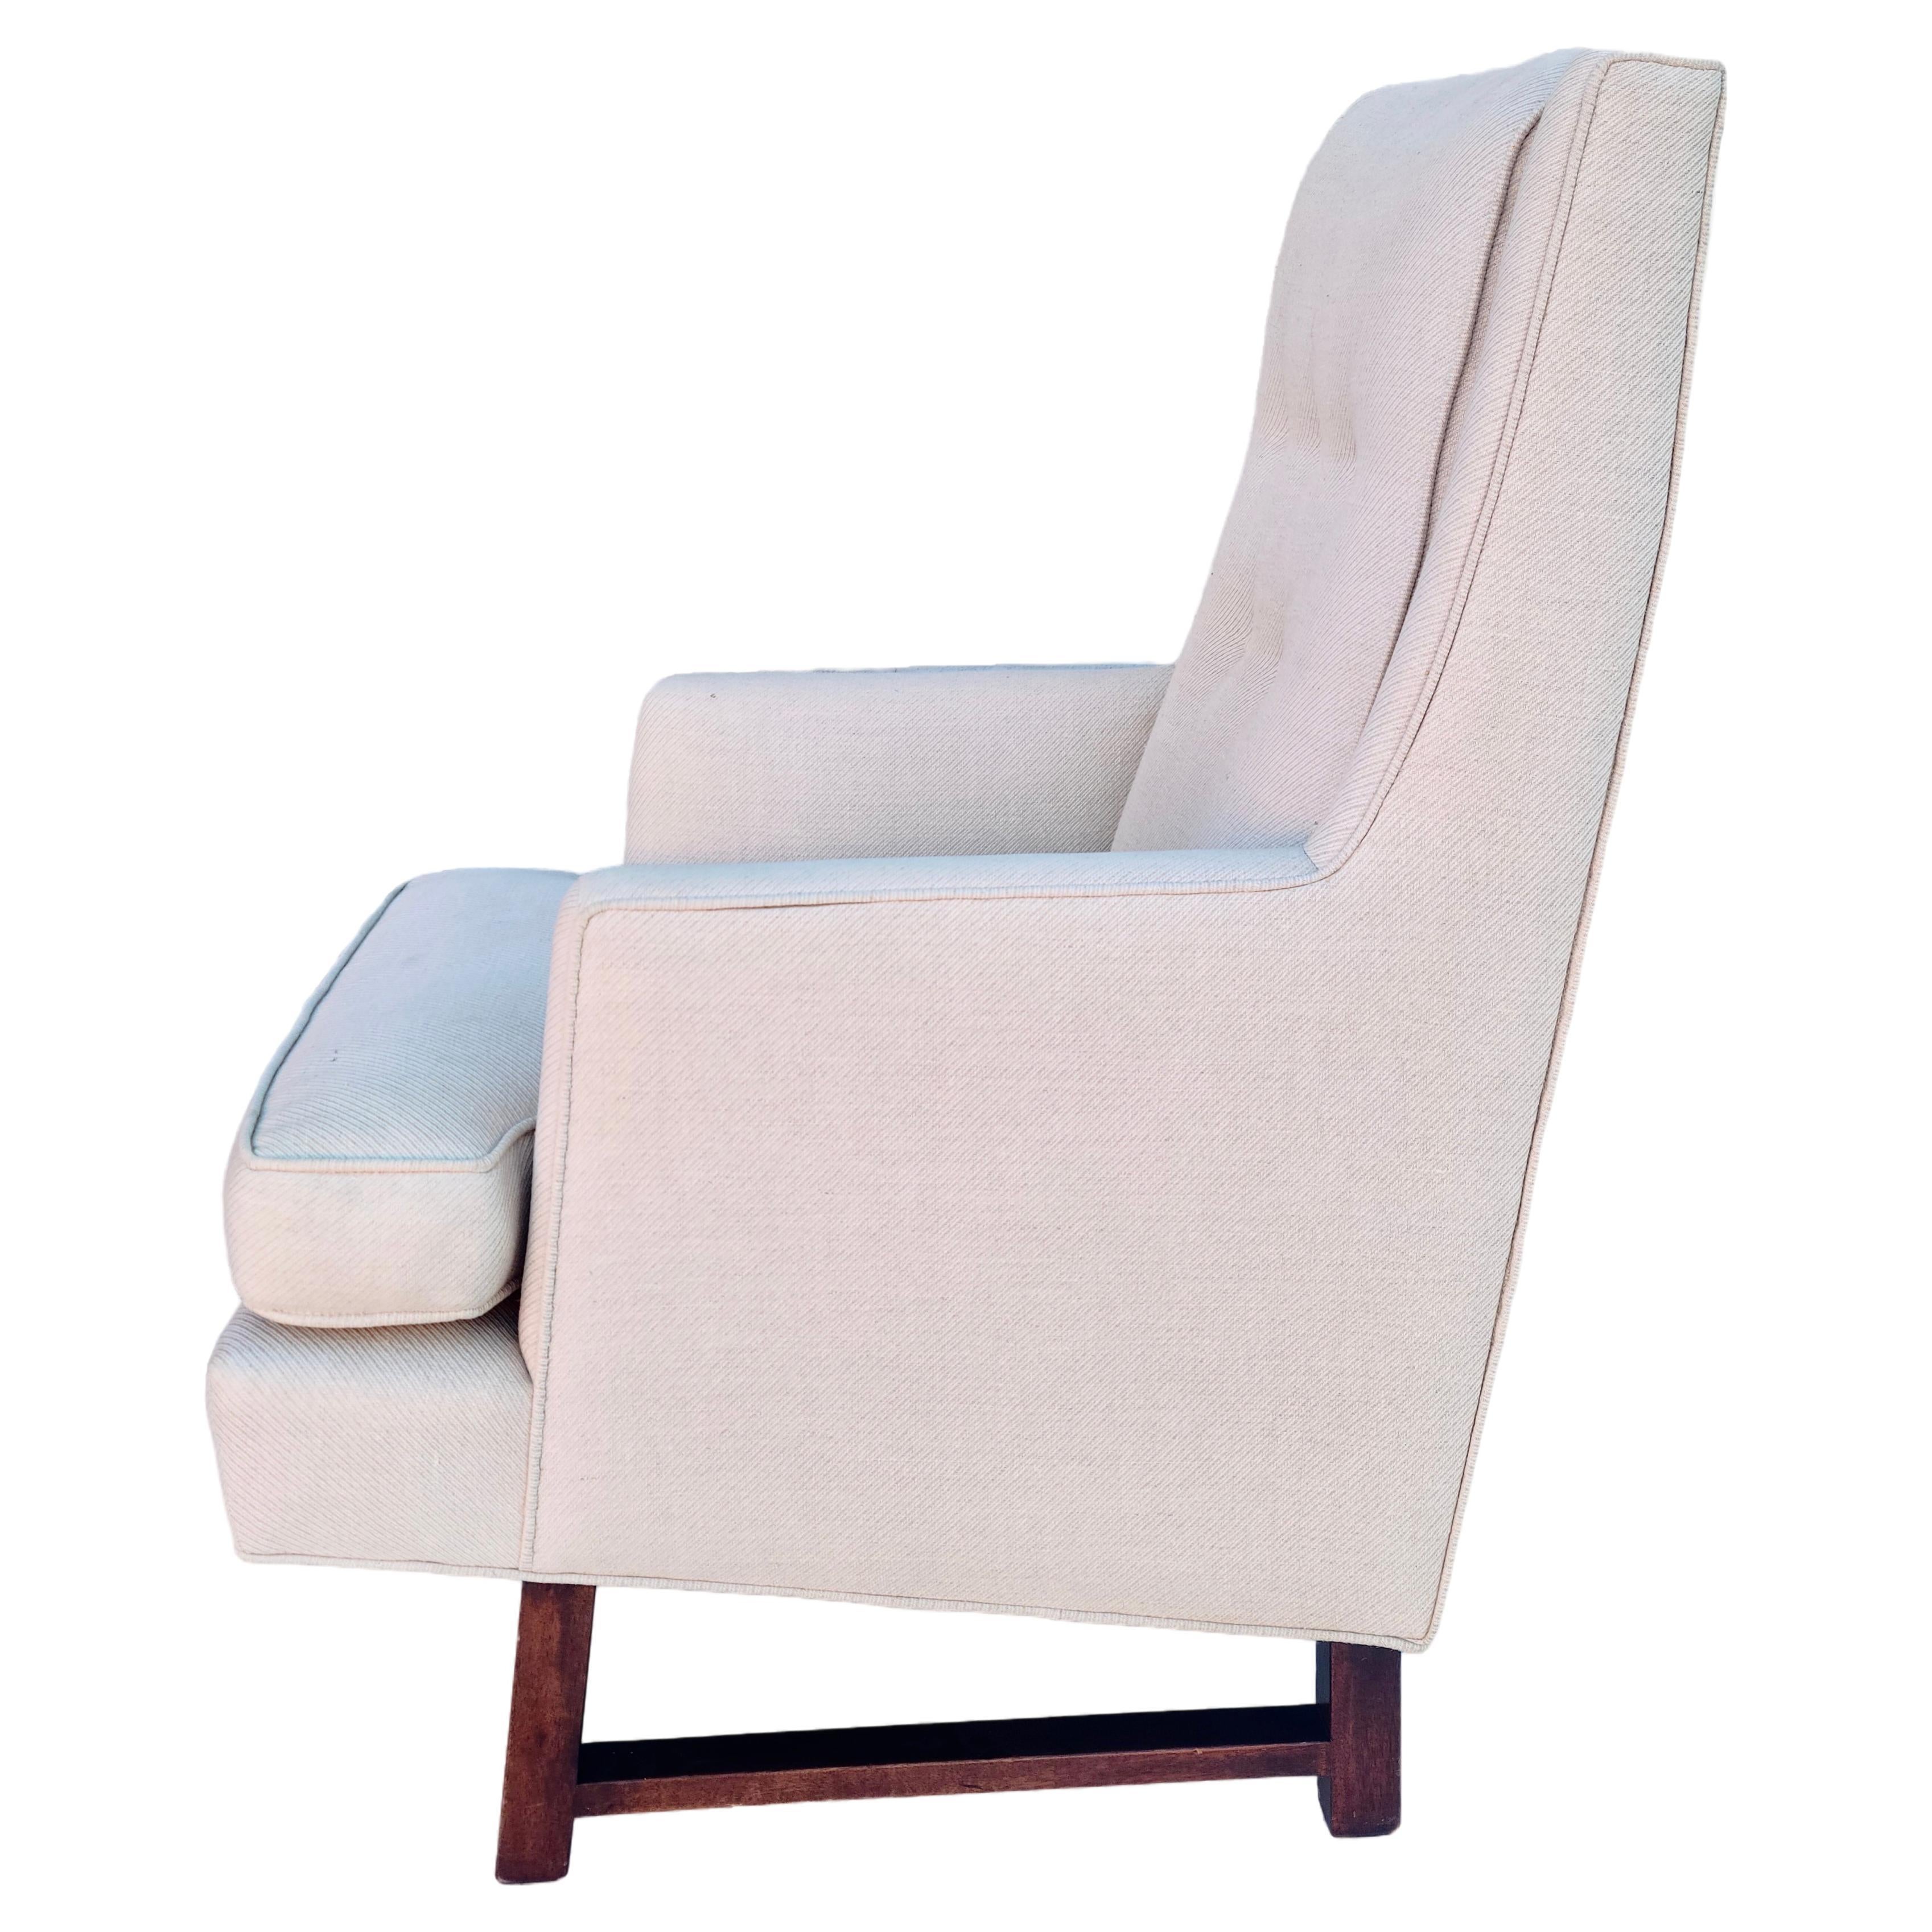 Dunbar Lounge Chair designed by Edward Wormley In Good Condition For Sale In Fraser, MI